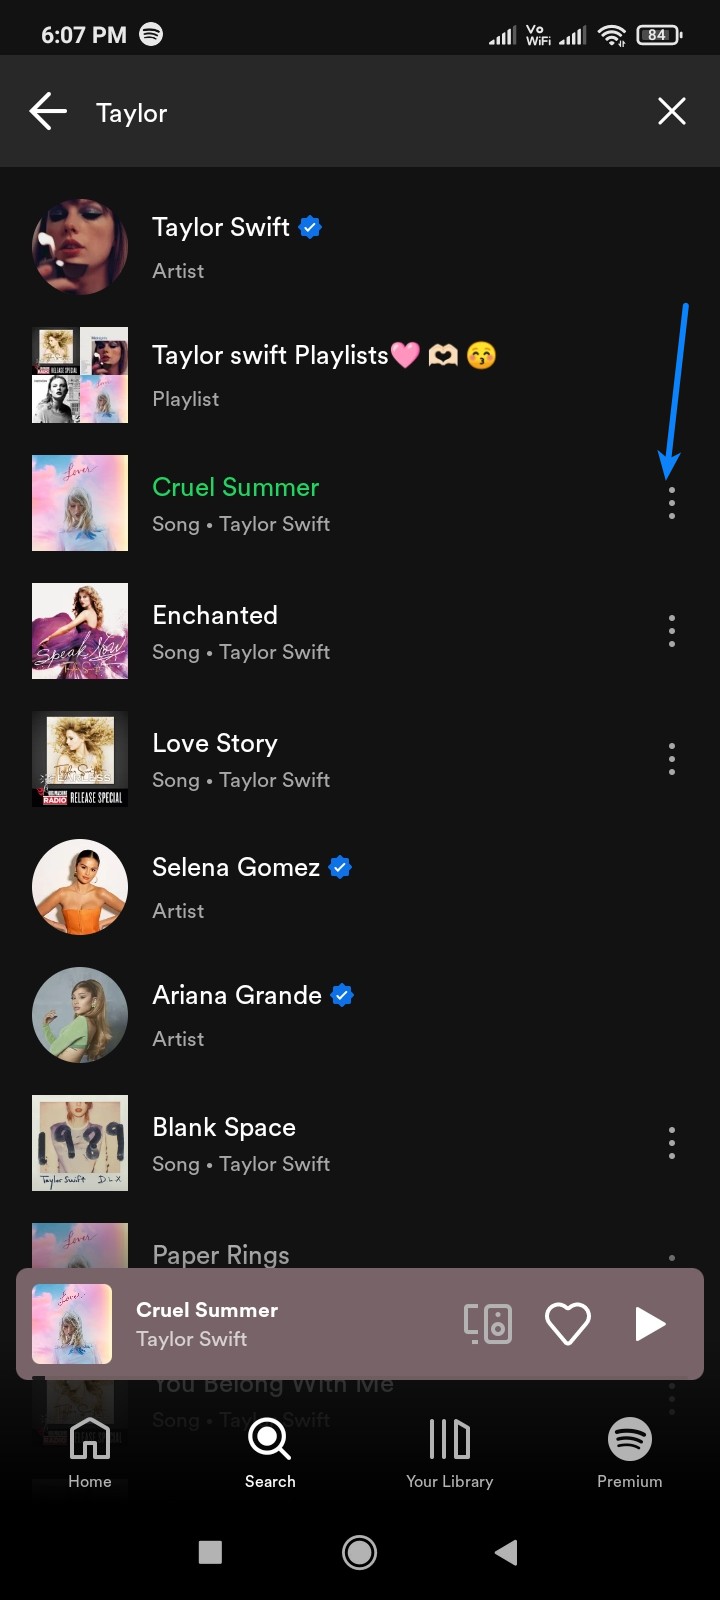 How to Download Songs on Spotify - Search Song